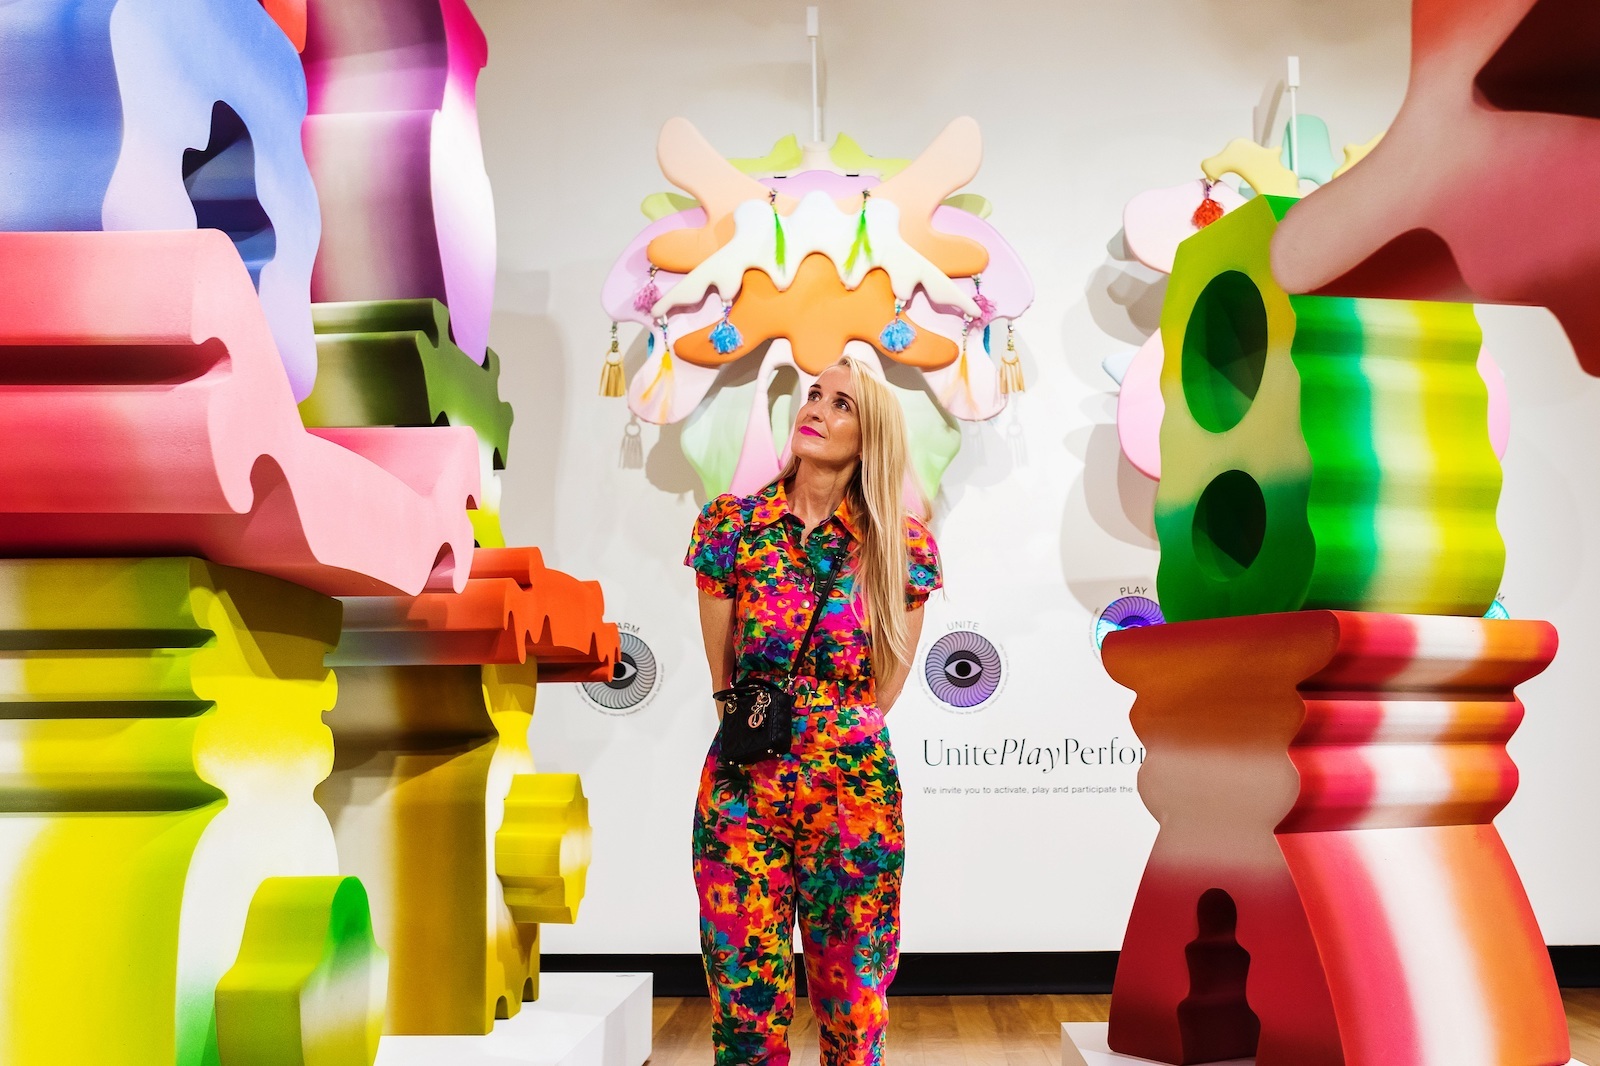 A woman stands among colourful foam shapes, soft layered sculptures hang from the wall